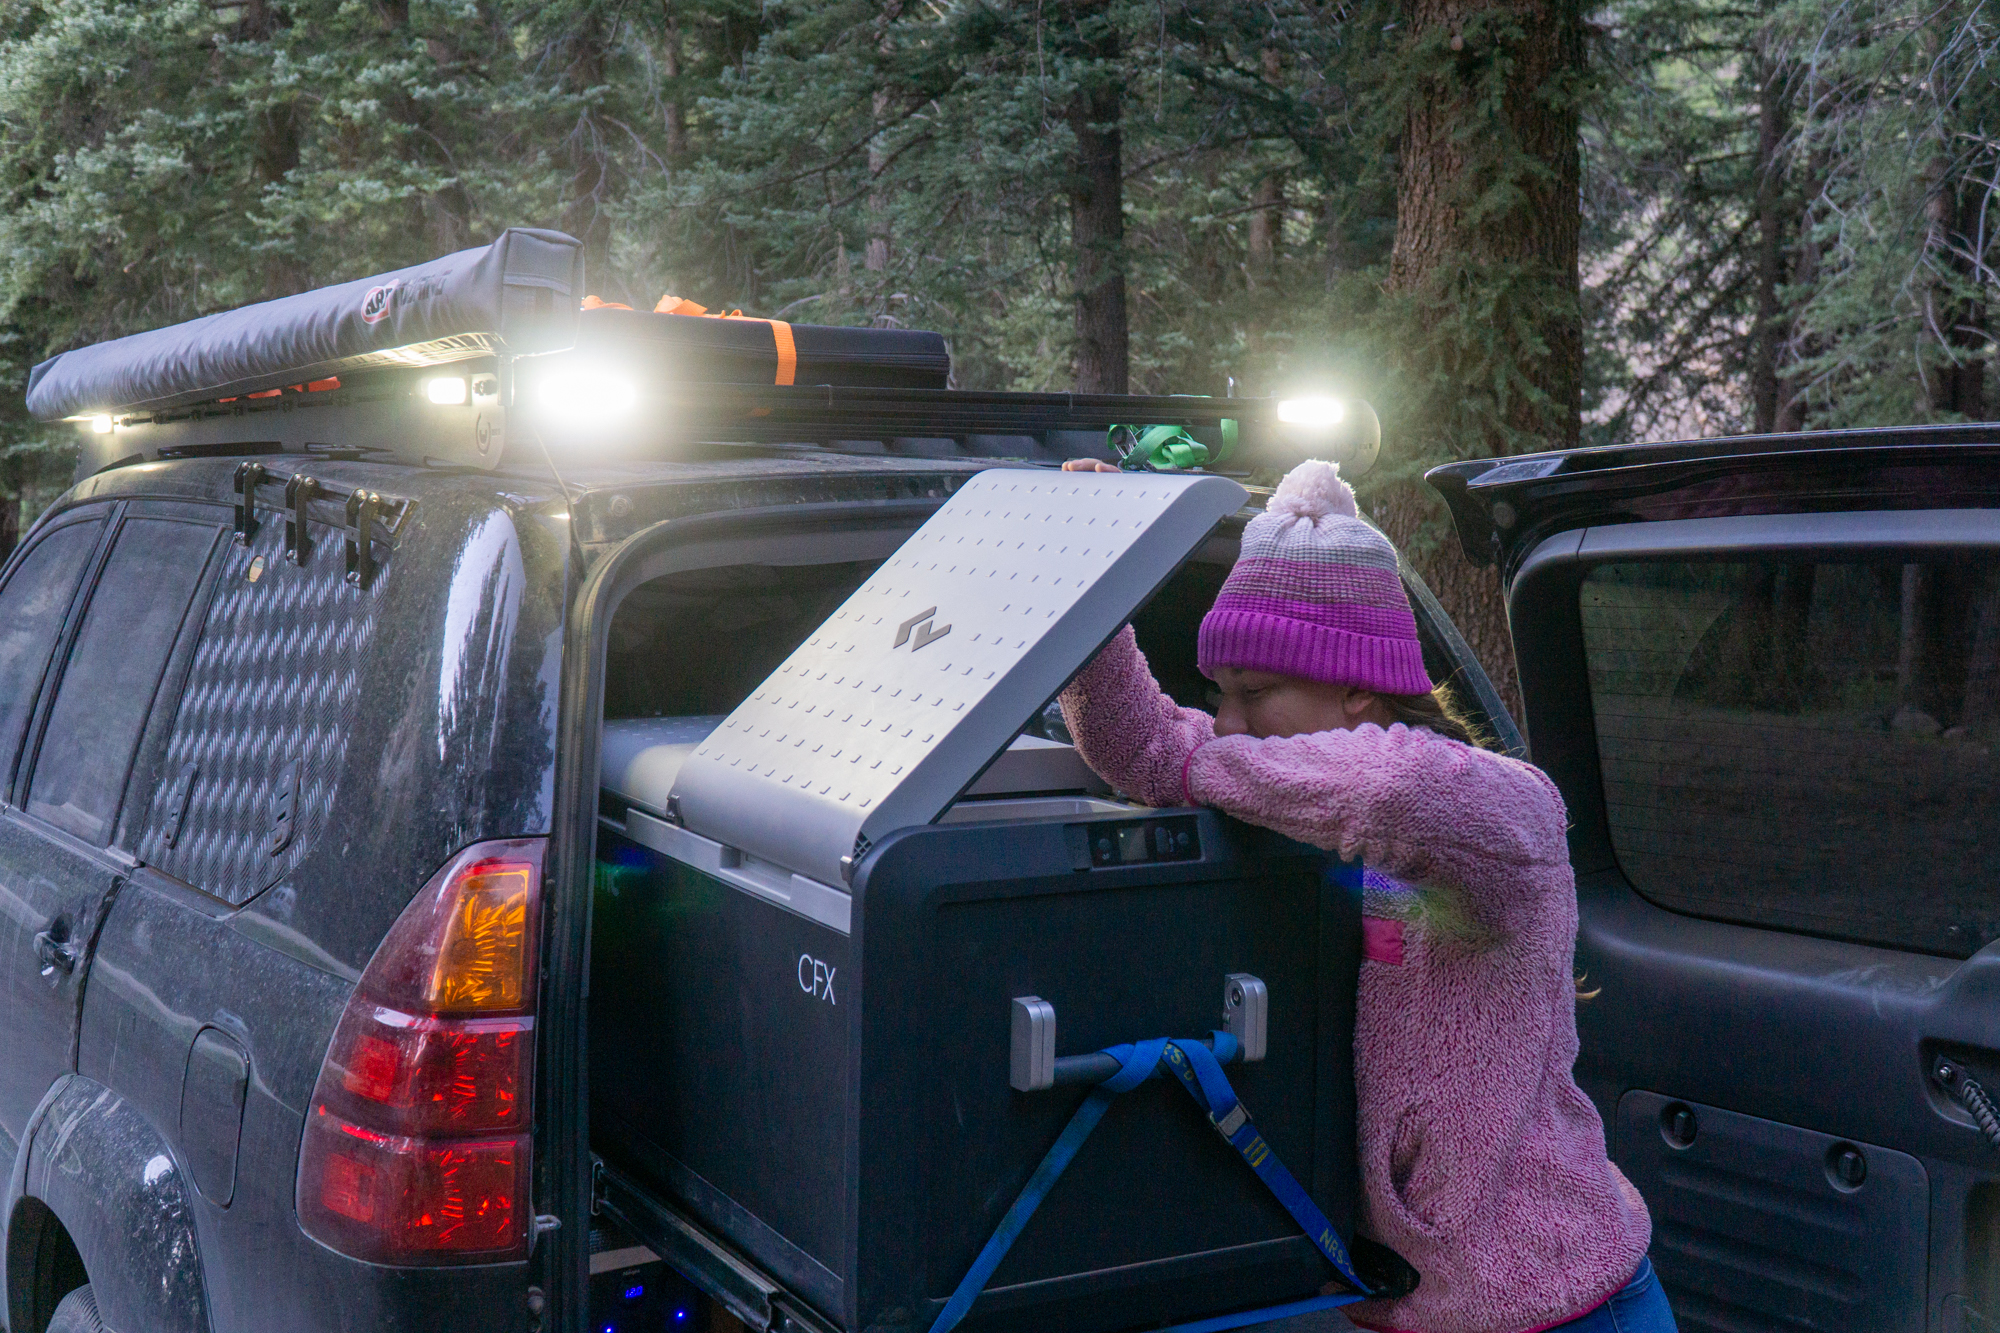 The DOMETIC CFX3 95DZ is a BEAST of an Overland Refrigerator